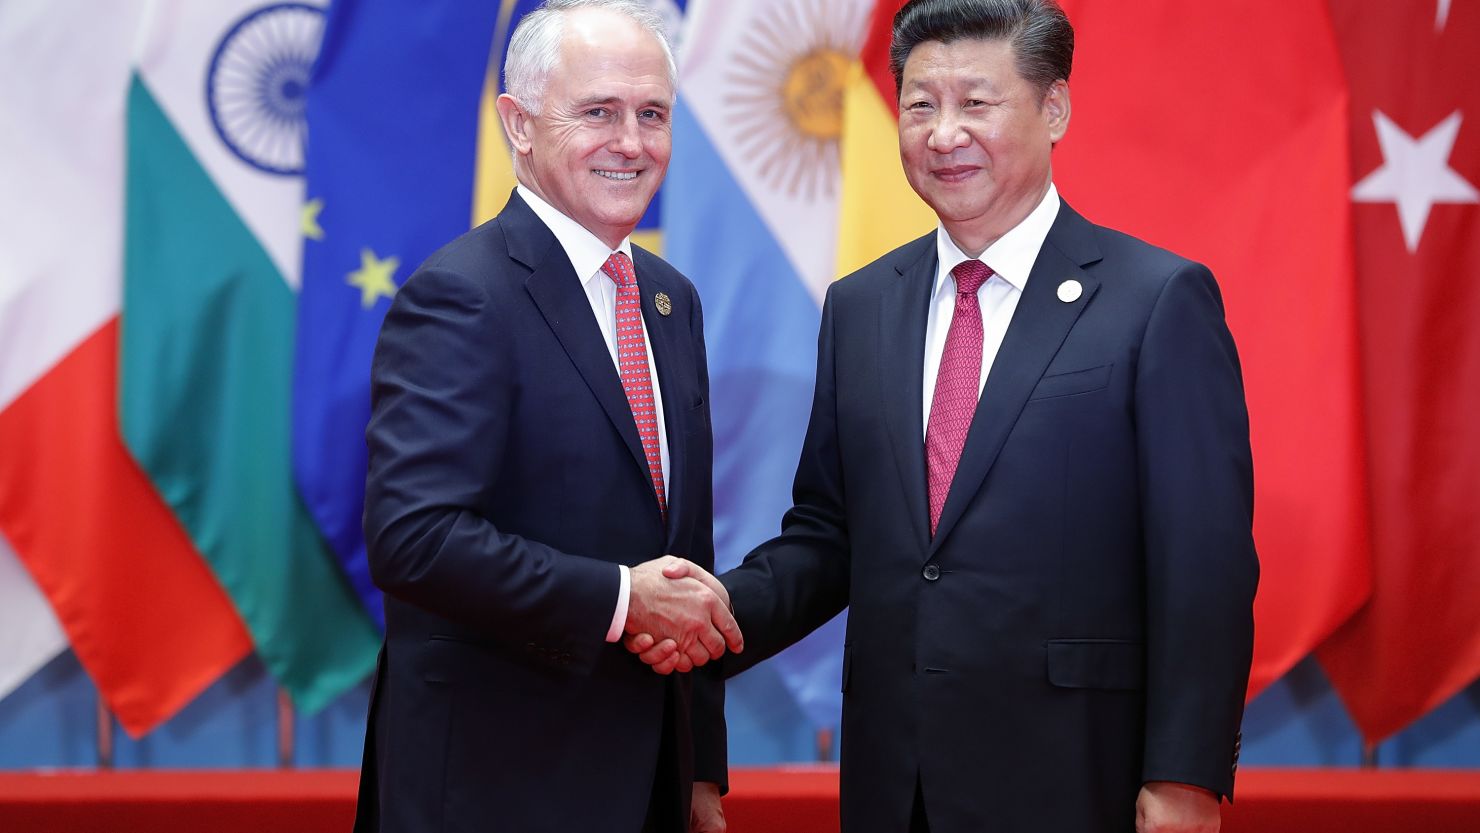 Chinese President Xi Jinping shakes hands with Australia's Prime Minister Malcolm Turnbull on September 4, 2016 in Hangzhou, China